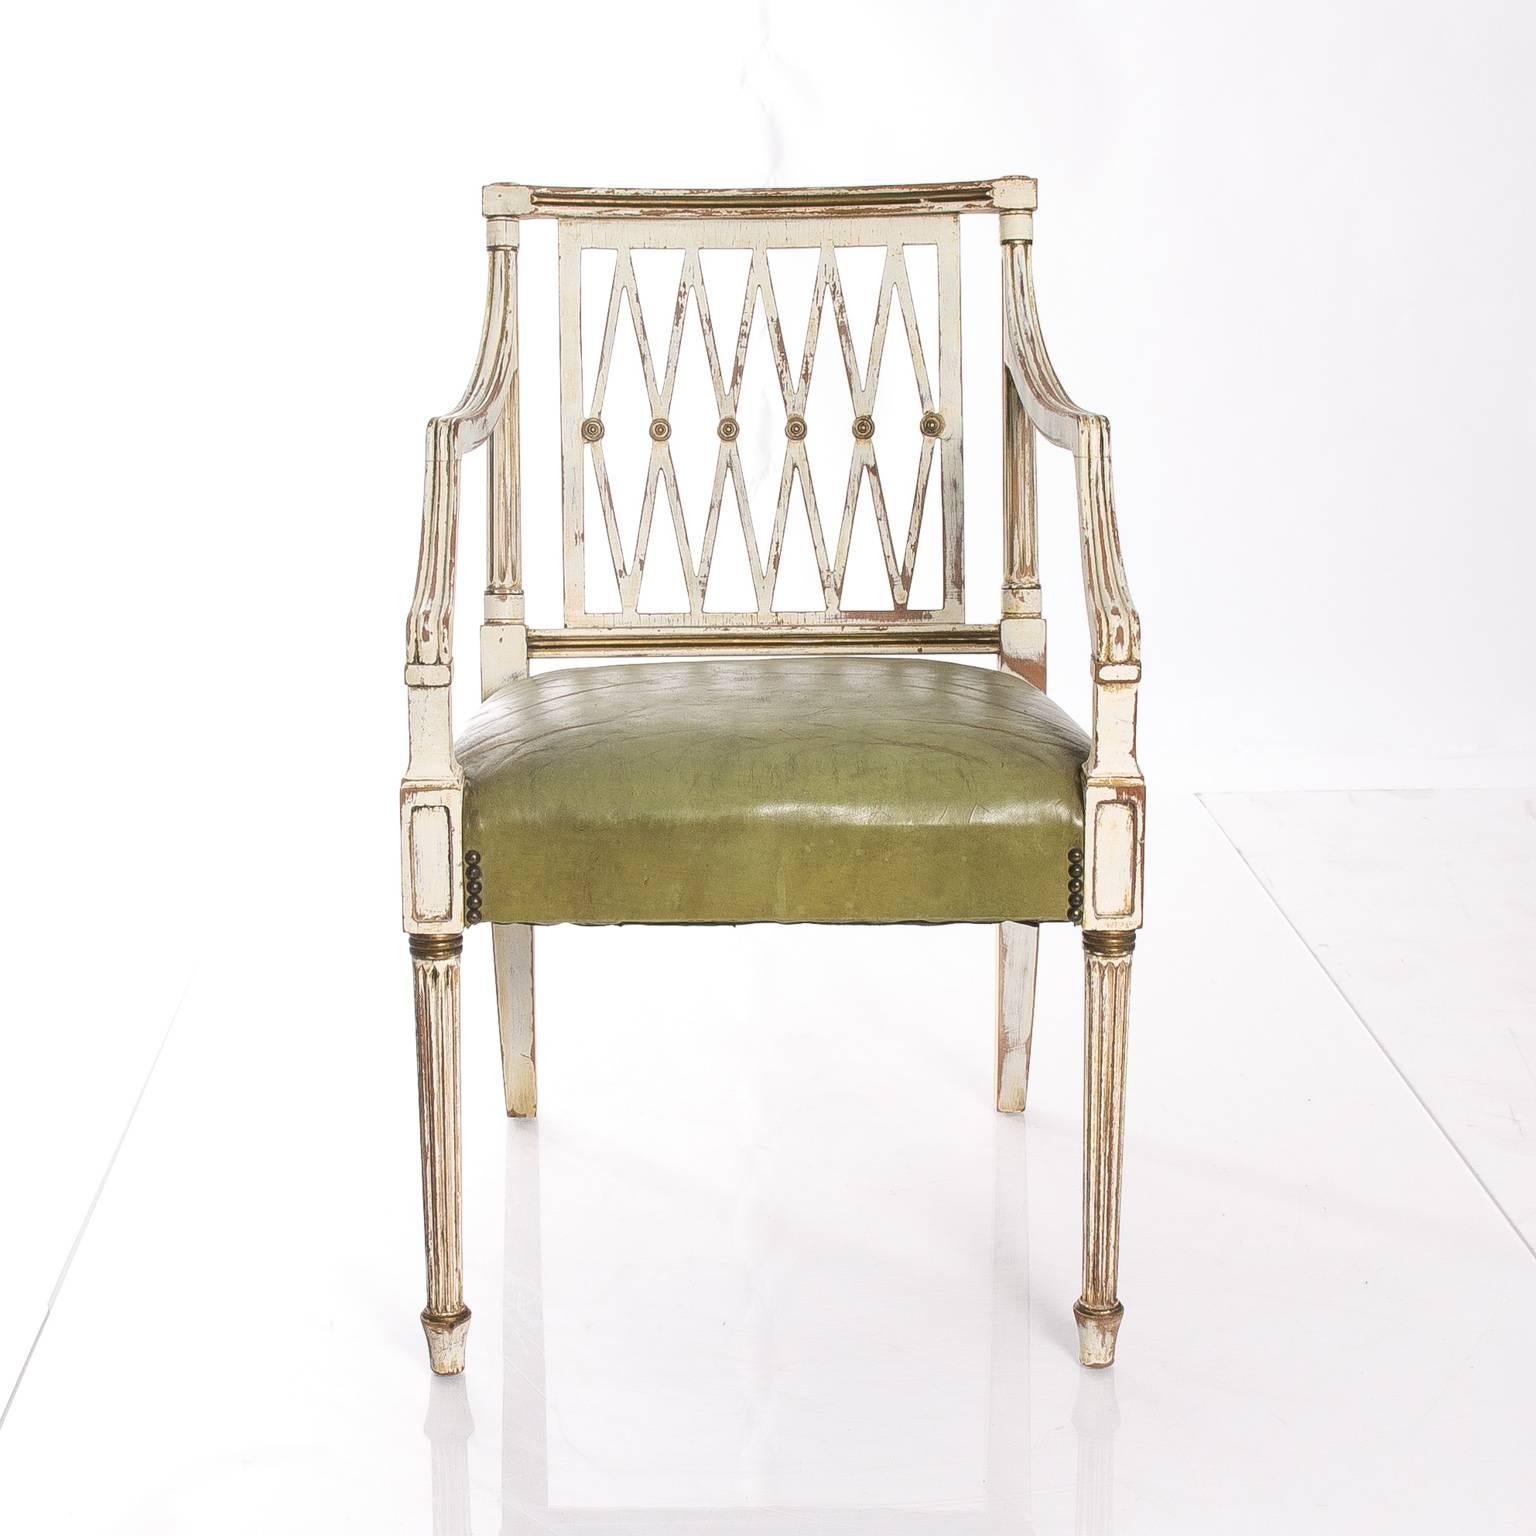 Early 20th century painted Regency style open armchair leather seat.
  